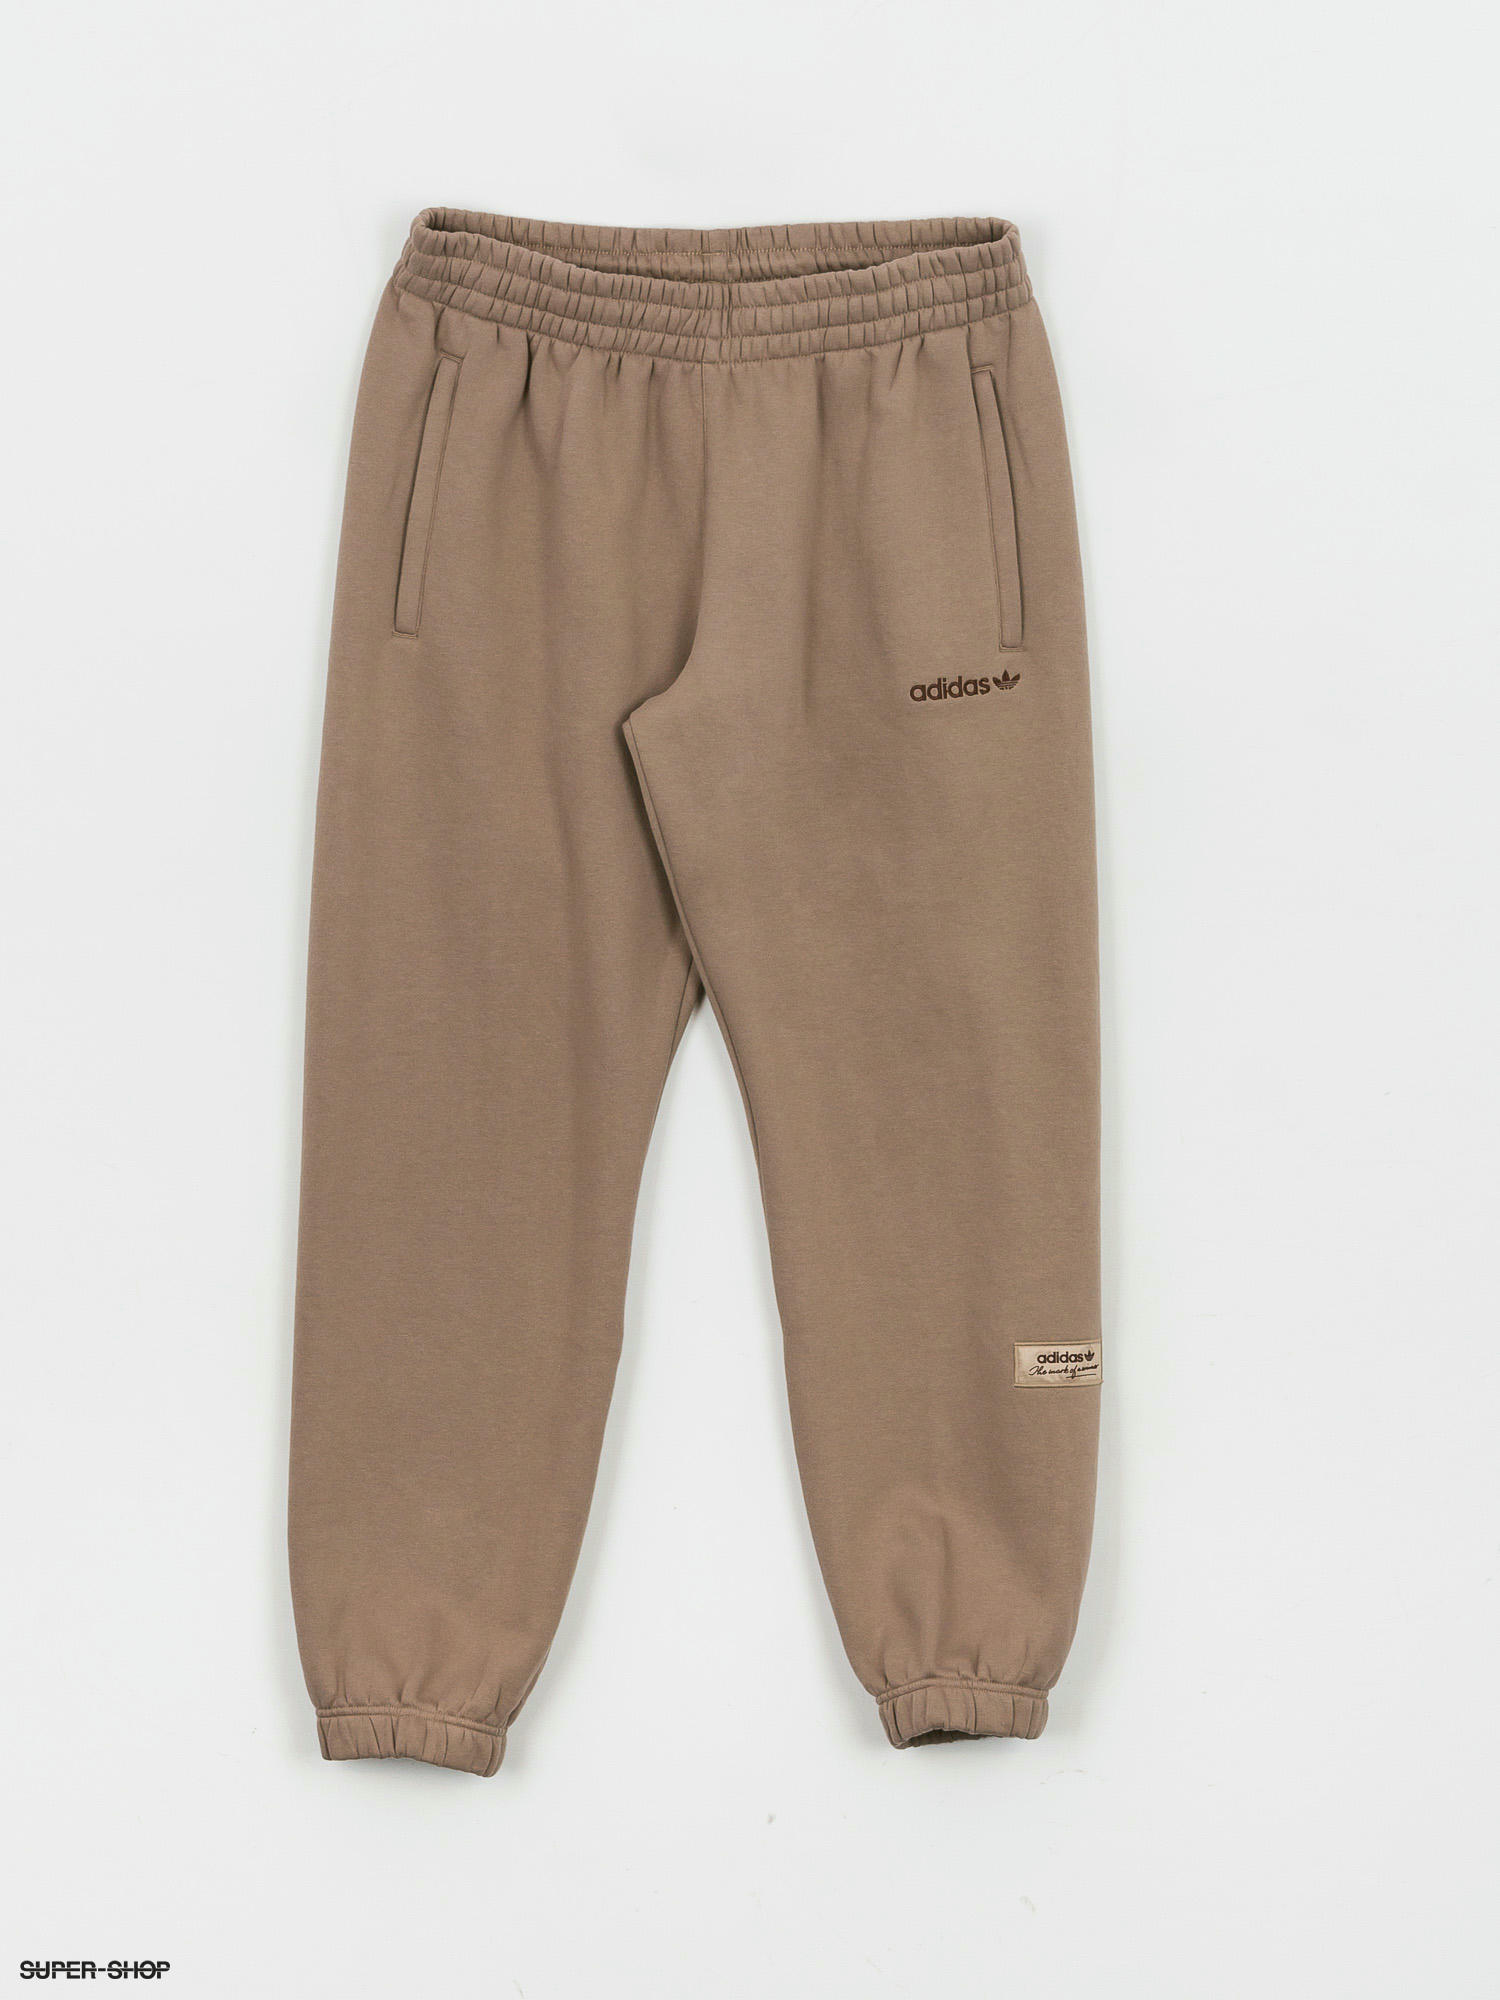 adidas Originals TRF (chalky Linear Pants brown)